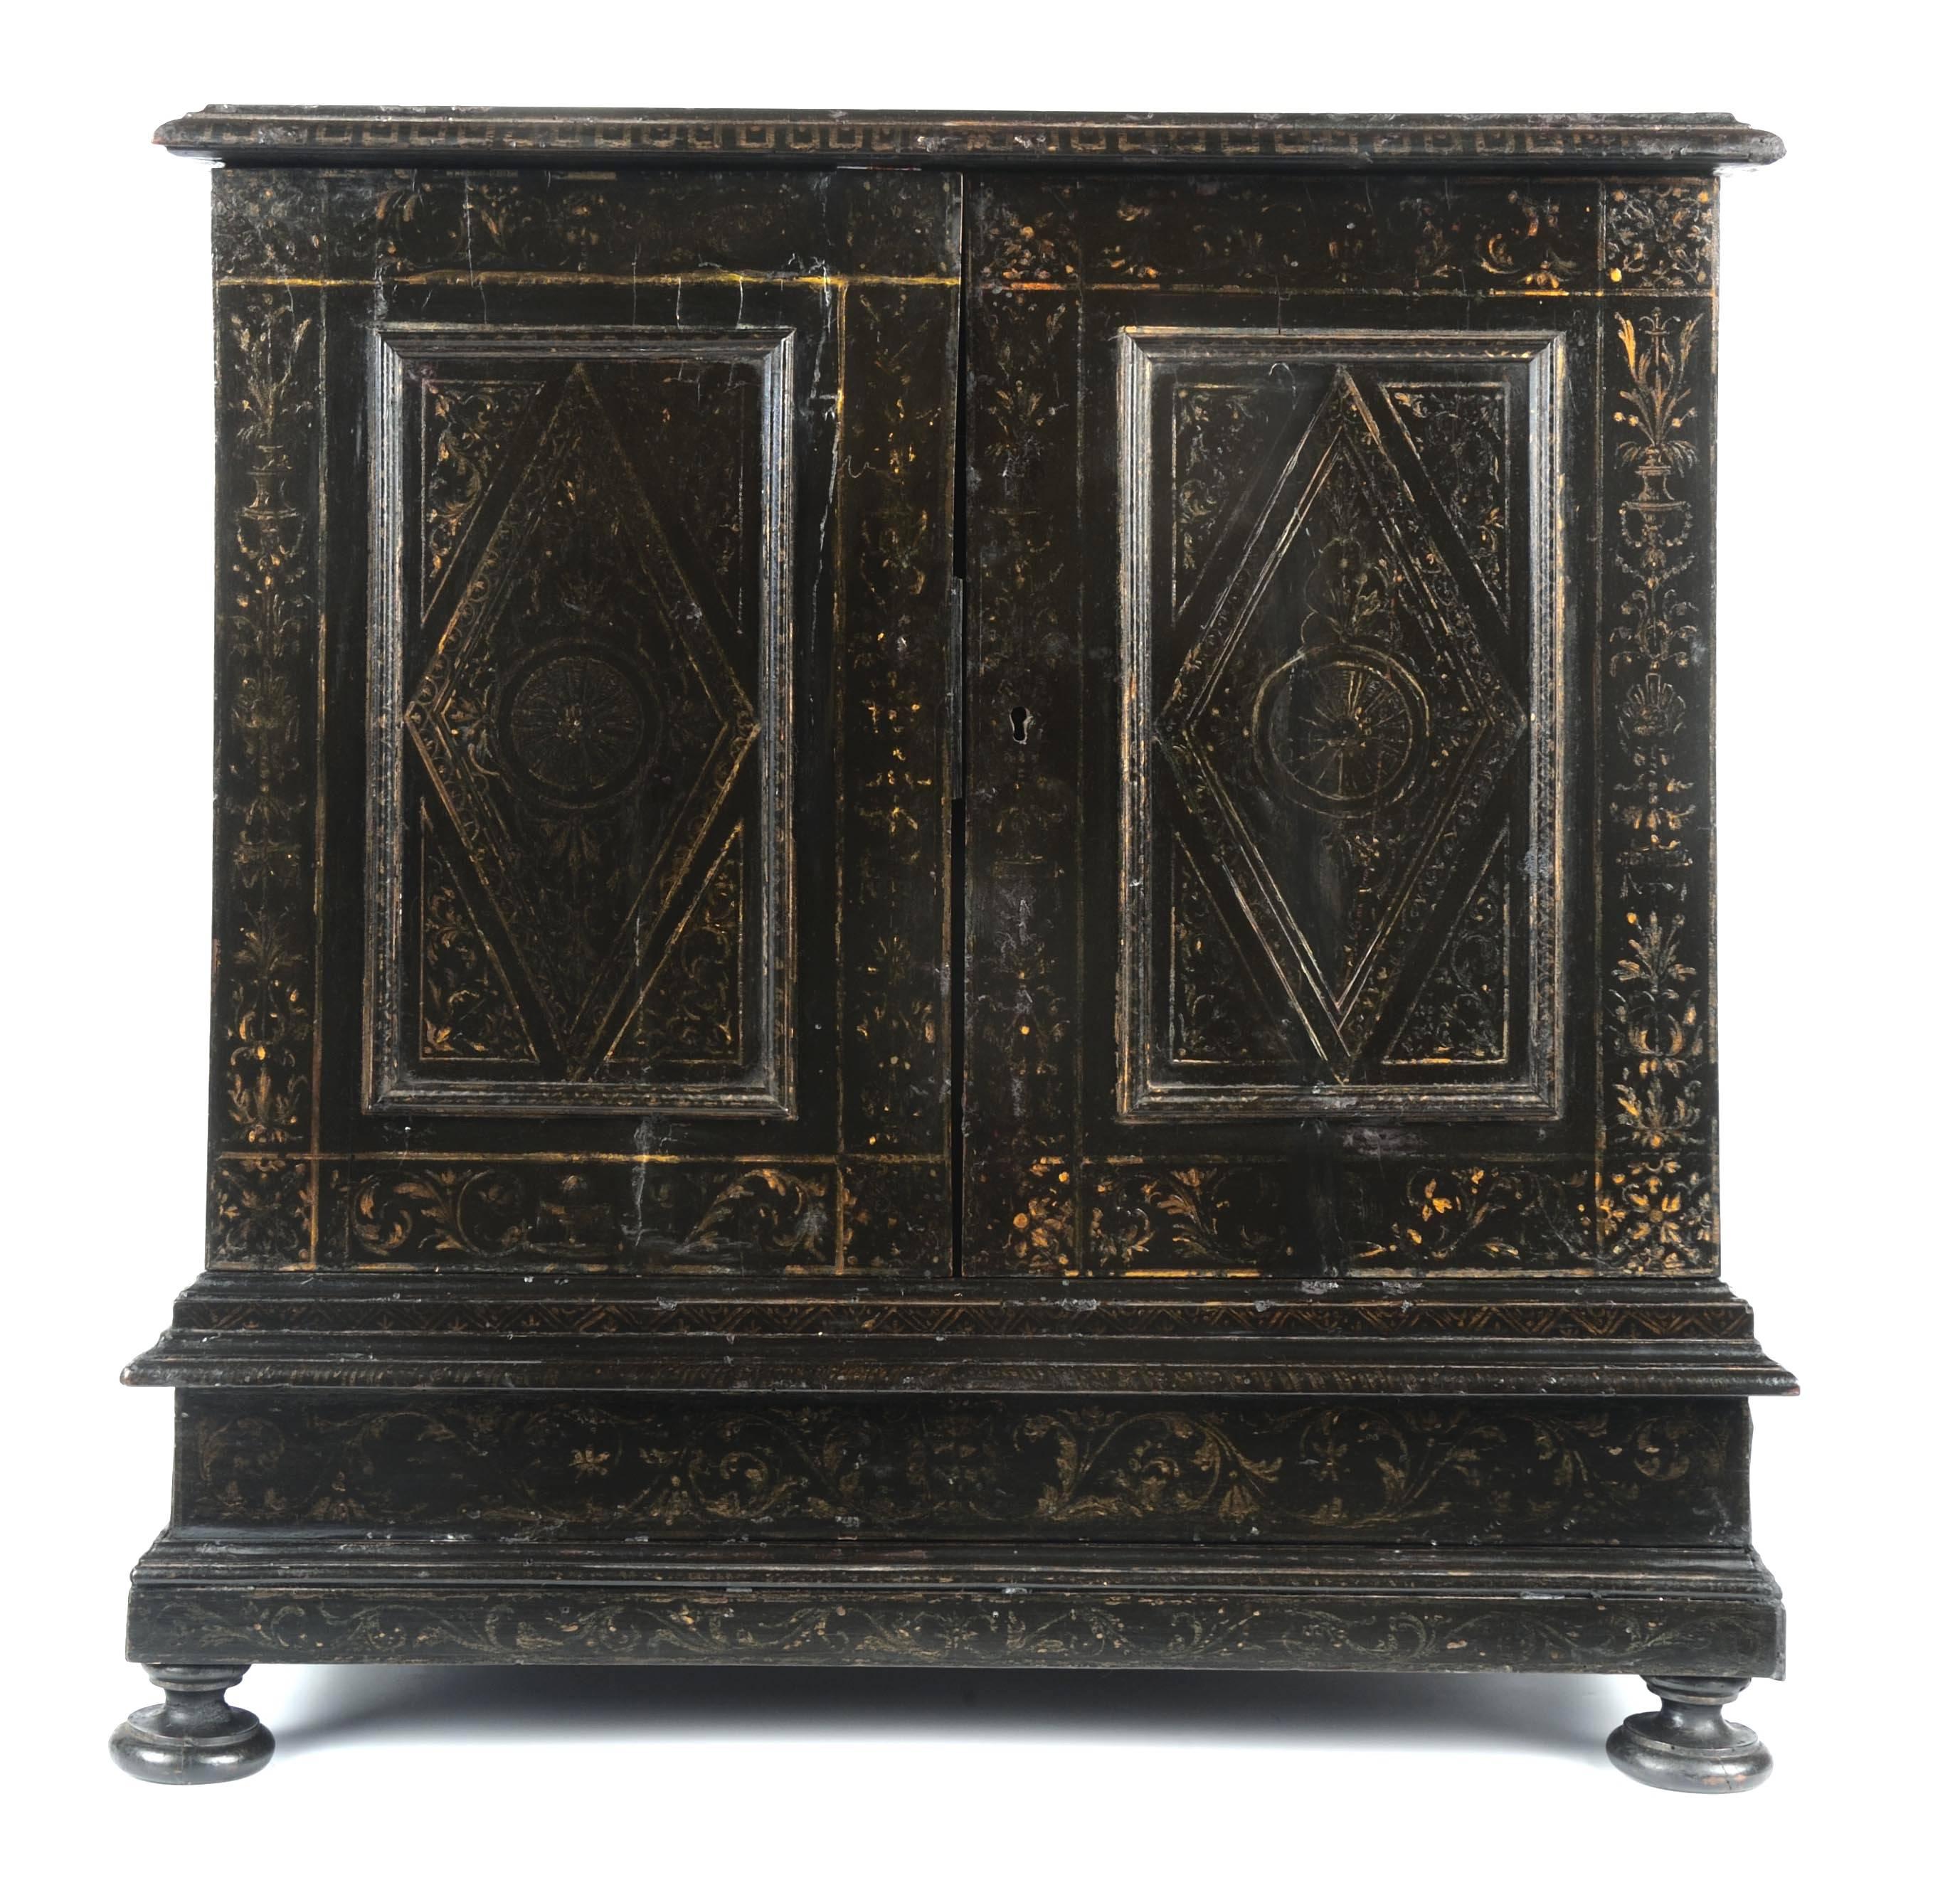 An Italian ormolu-mounted, ebonized wood and Pietra Dura table cabinet (or collector’s cabinet) with elaborate gilt foliate stenciling and grisaille grotesques. The decoration imitates classical architecture with drawers around a central portico and